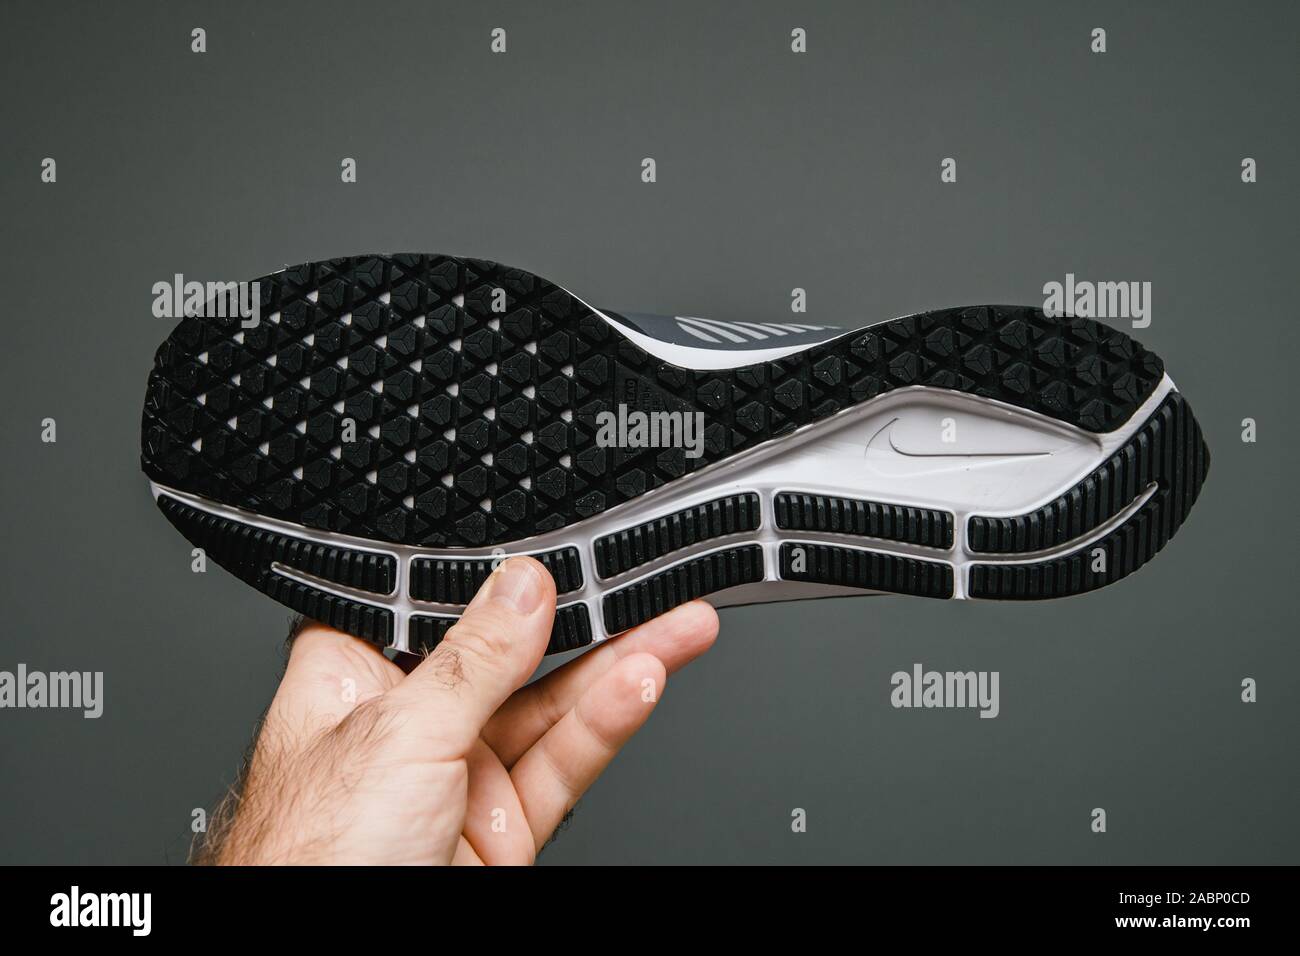 Paris, France - Oct 24, 2019: Man hand holding against gray background new  professional running shoe manufatured by Nike model Air Zoom Pegasus 36  Shield Stock Photo - Alamy